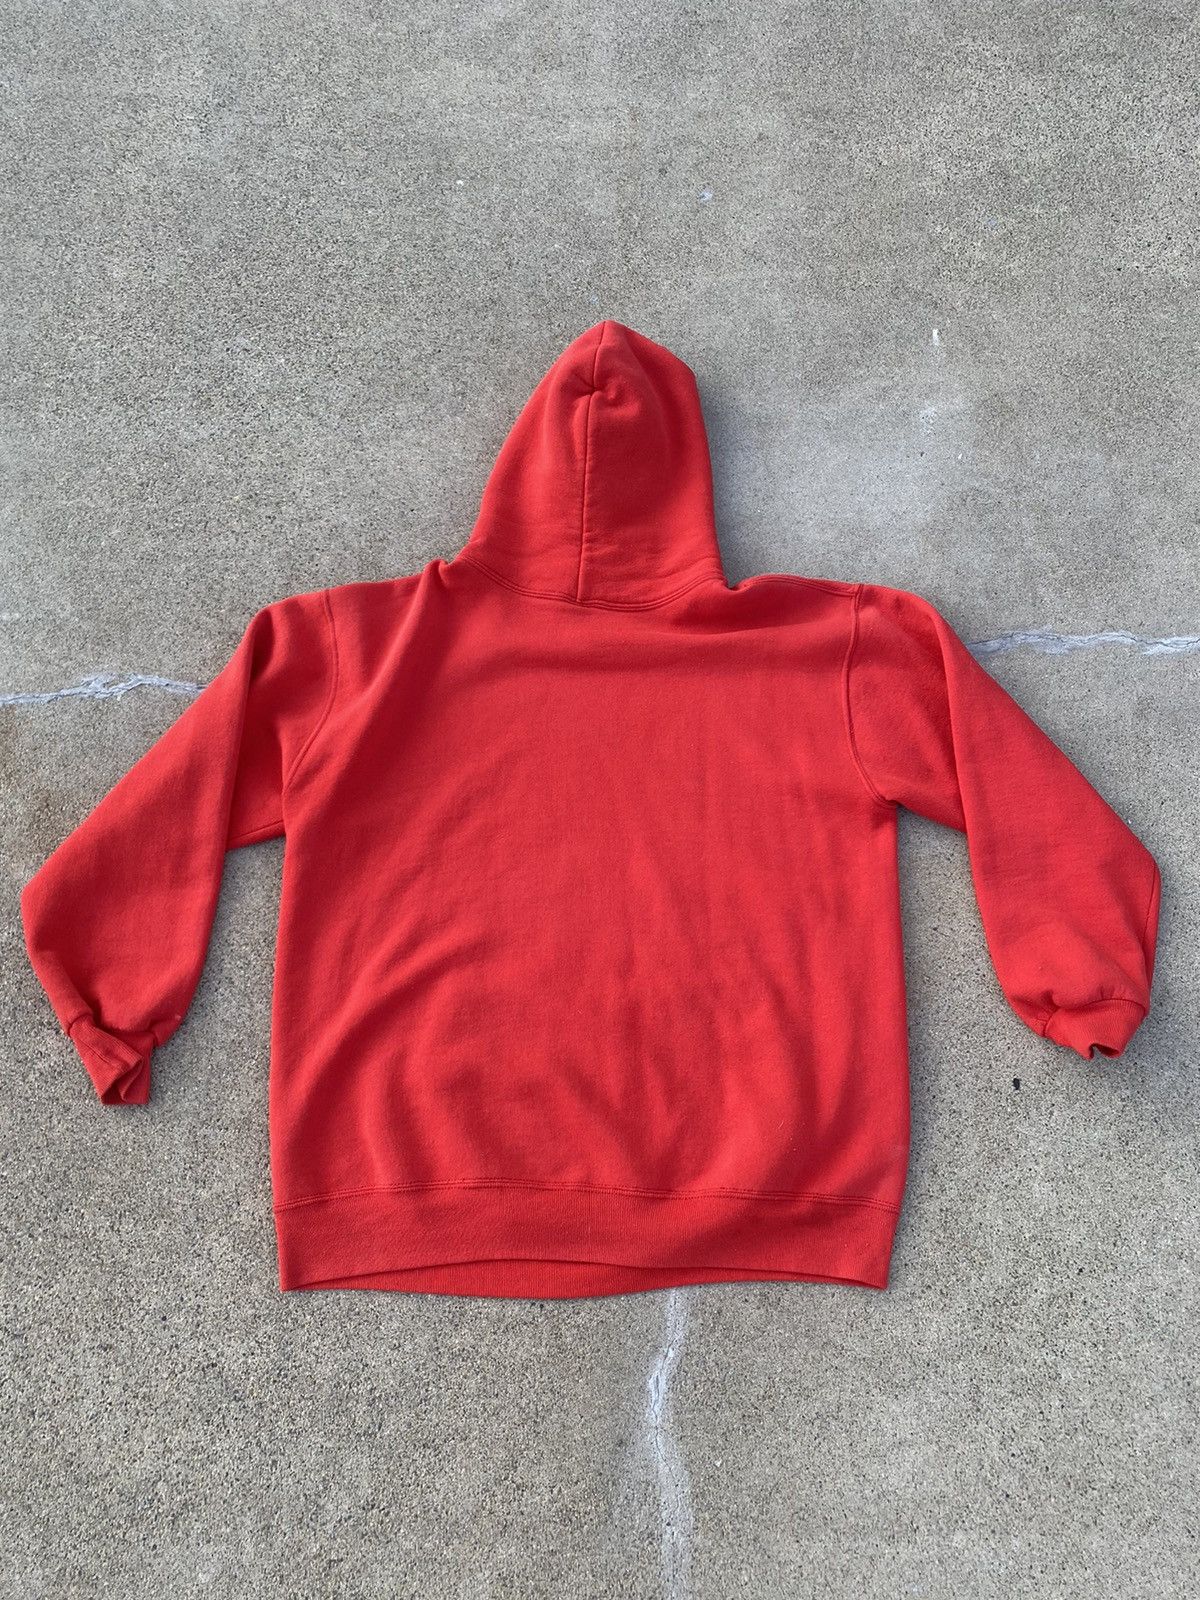 Vintage Vintage 90s Red Hots Russell Hoodie Size US L / EU 52-54 / 3 - 7 Preview